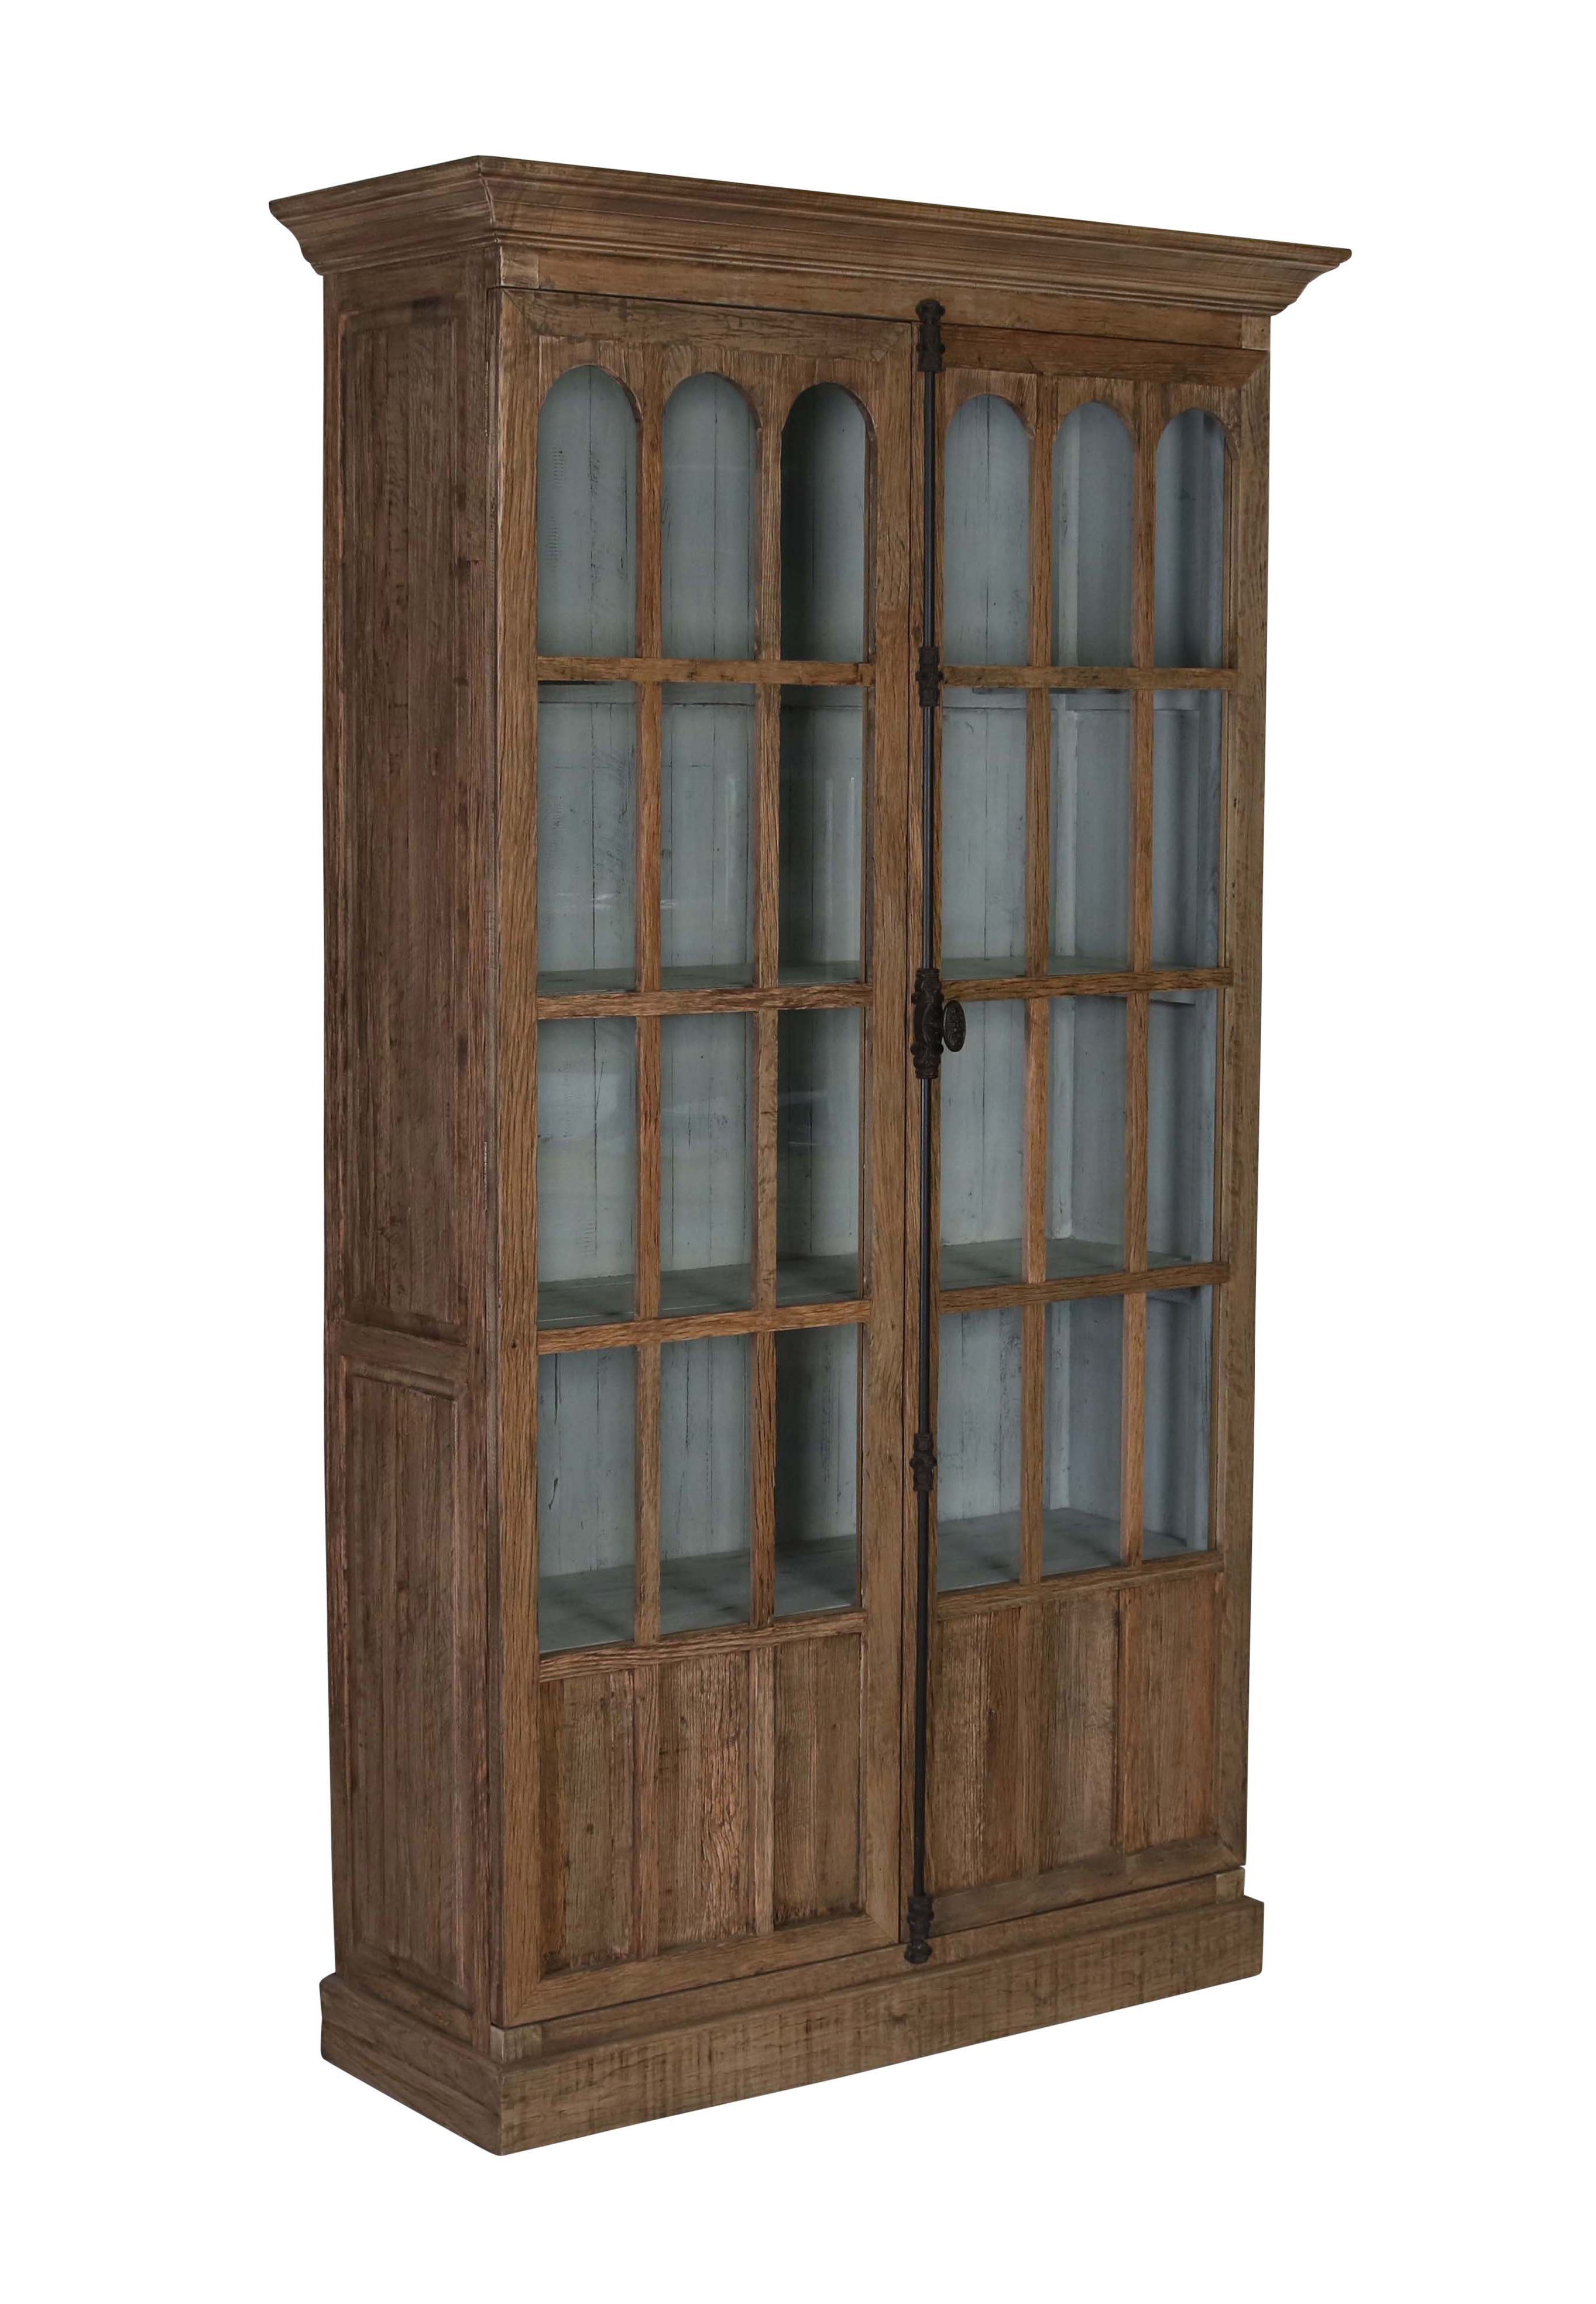 Block & Chisel recycled pine bookcase with glass doors